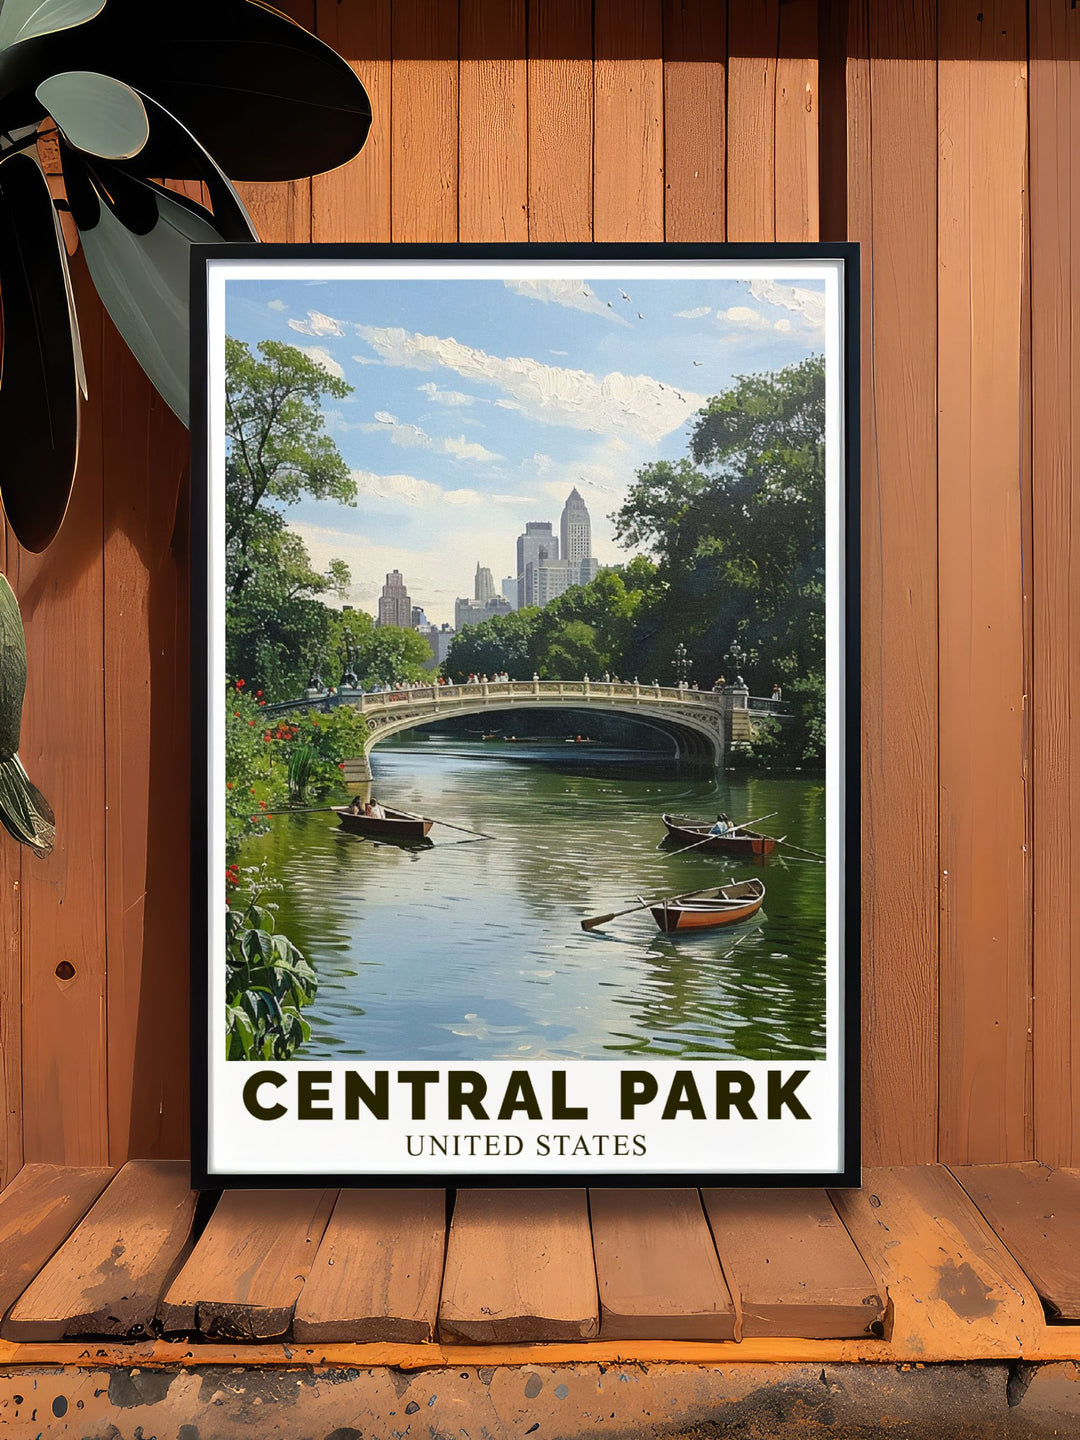 Showcasing the picturesque Bow Bridge and the tranquil atmosphere of Central Park, this travel poster adds a unique touch of natural and urban elegance to your living space.